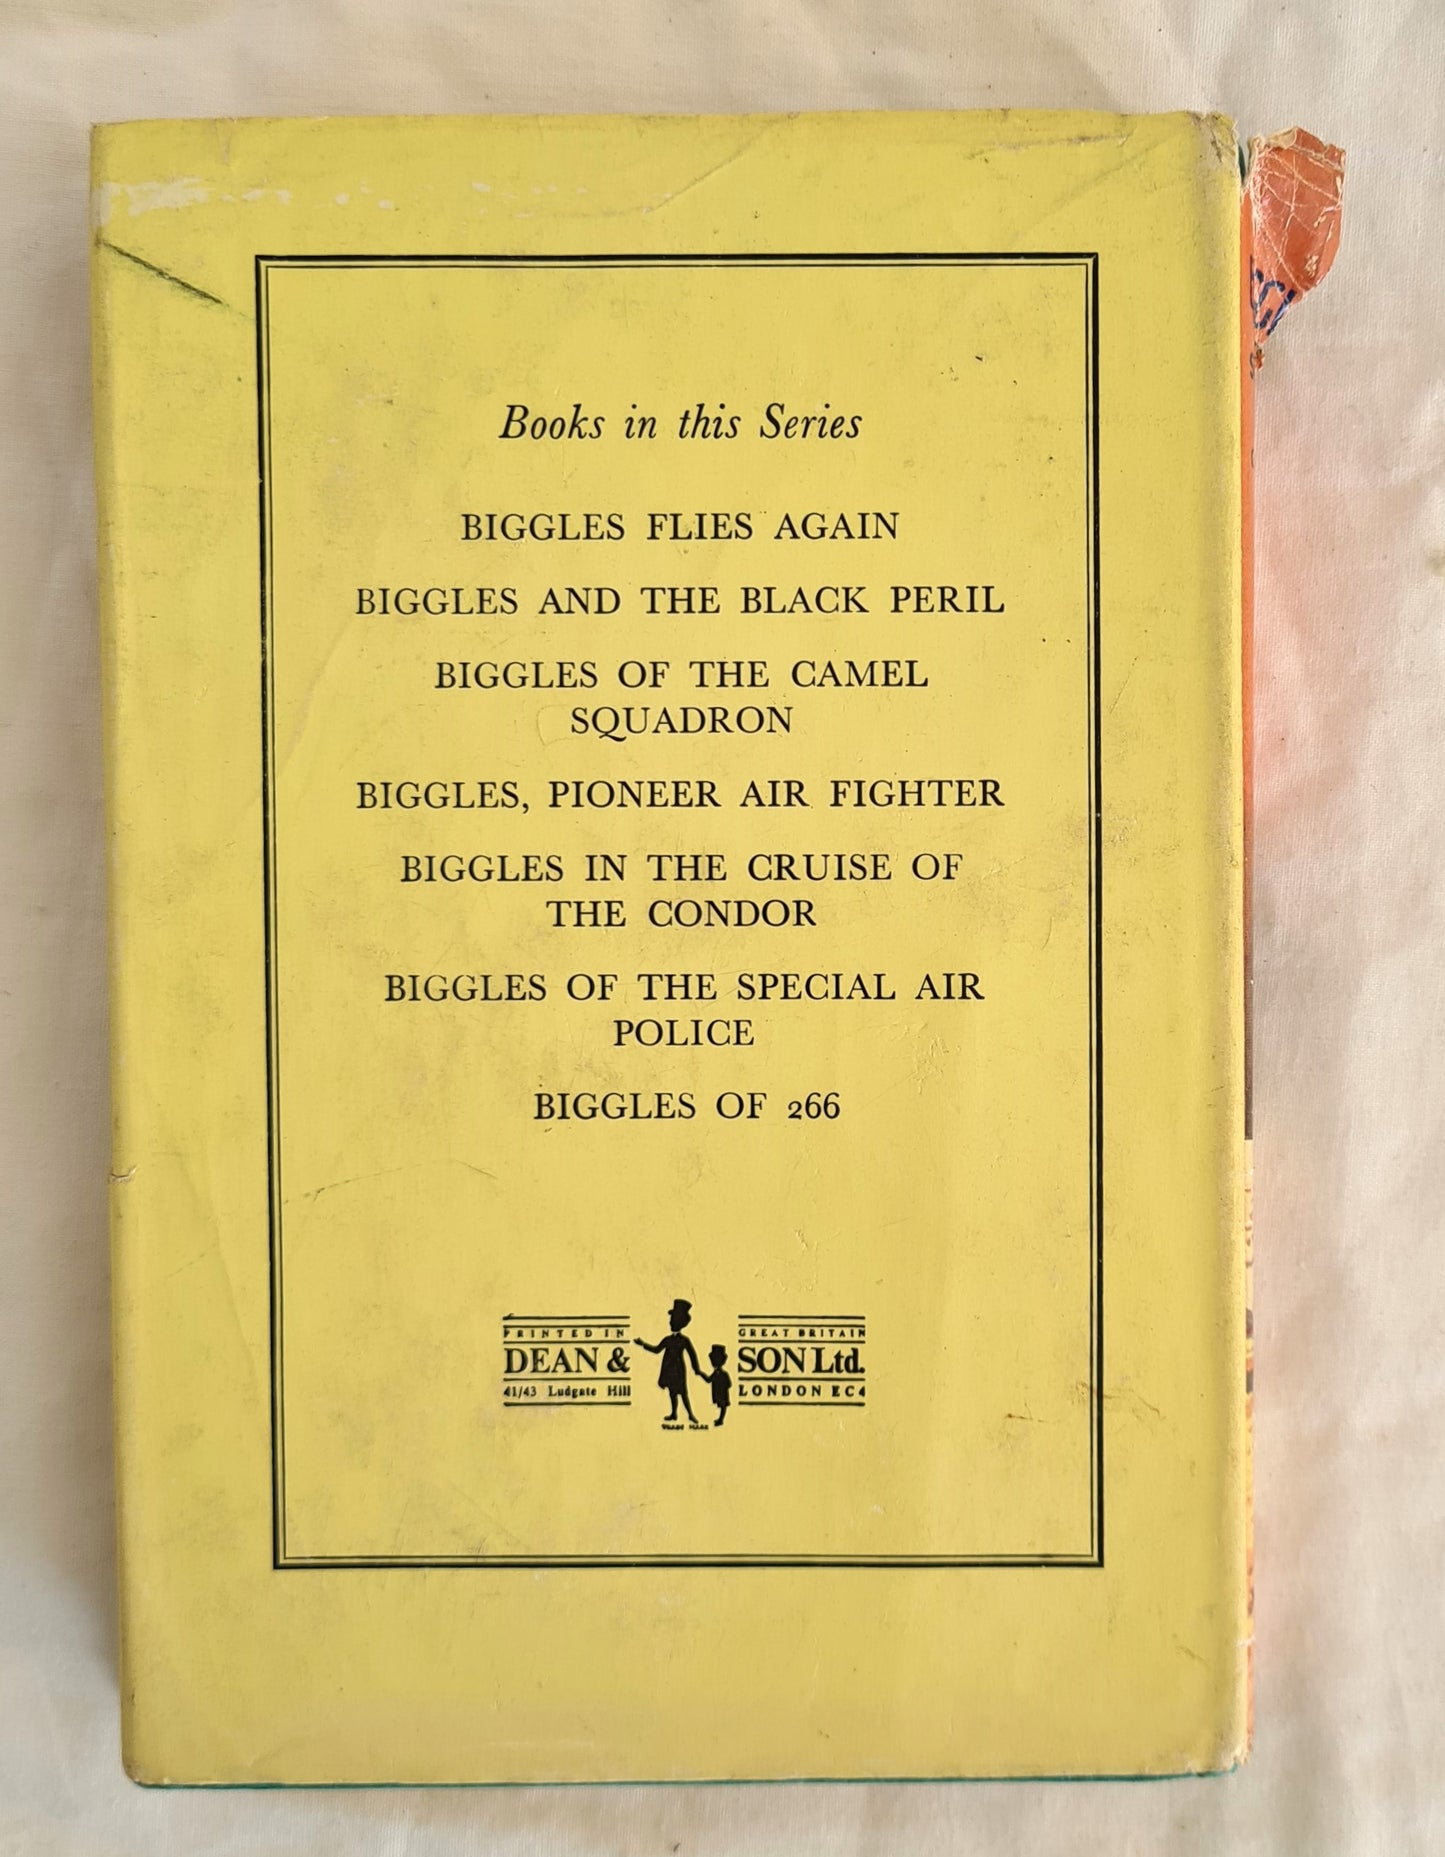 Biggles of the Special Air Police by Captain W. E. Johns